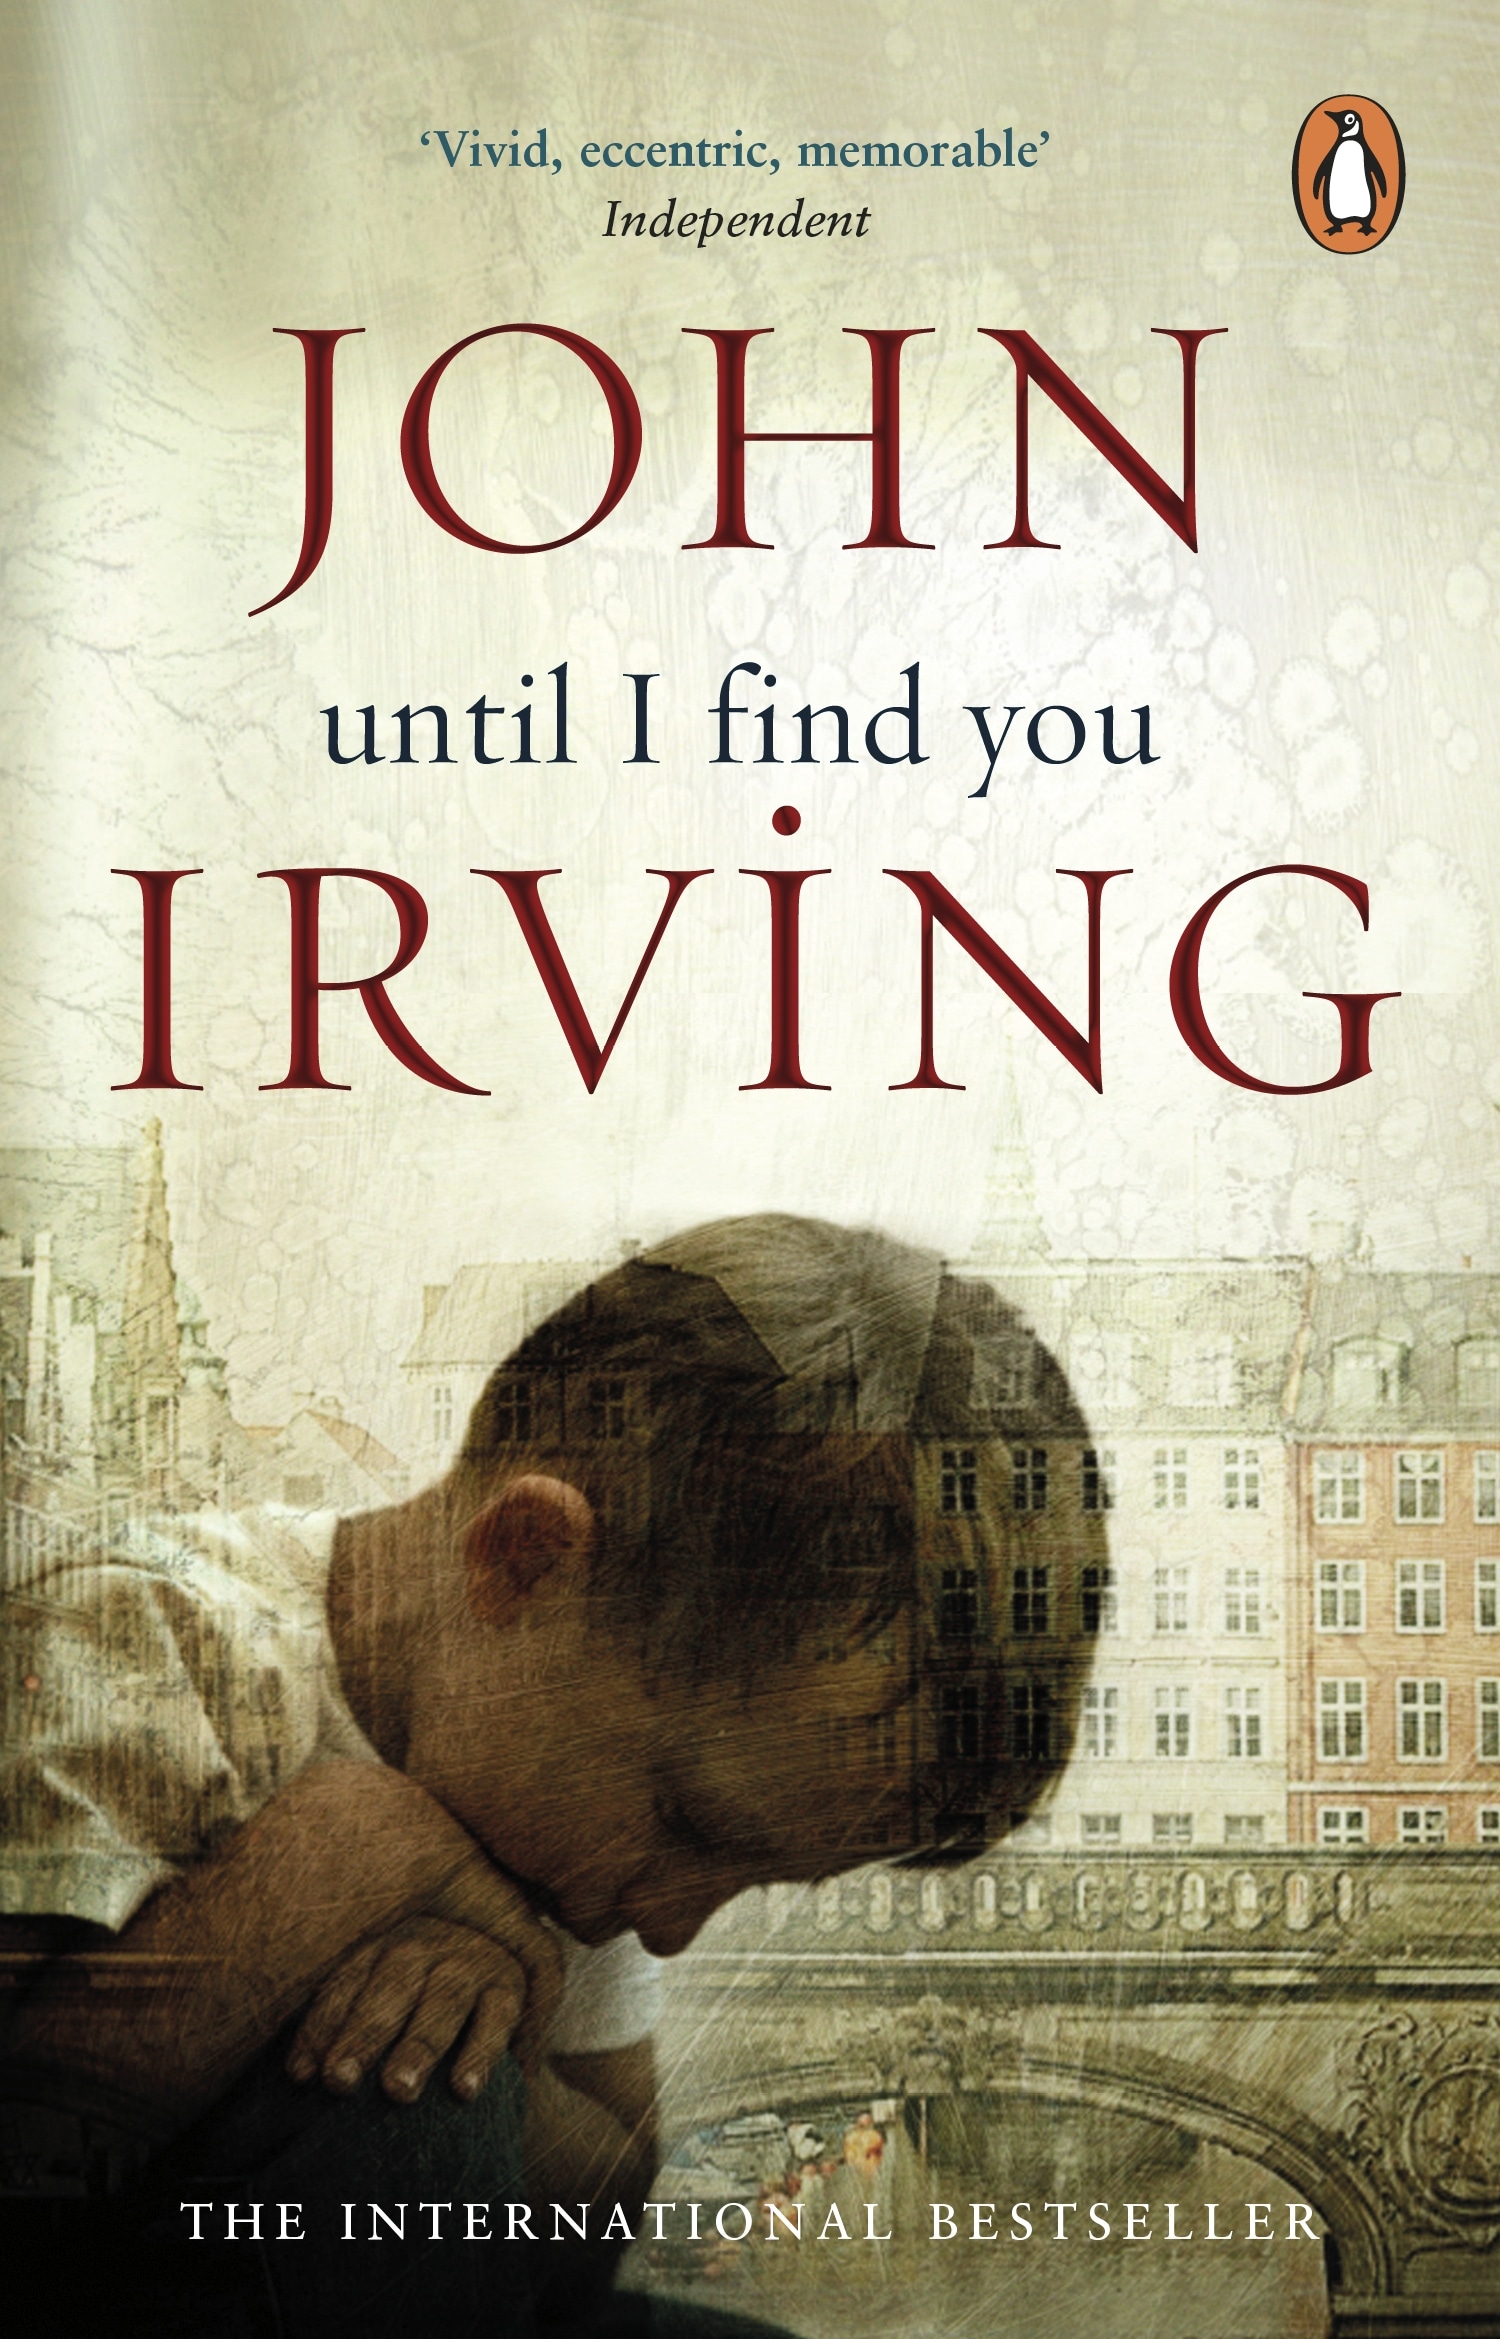 Book “Until I Find You” by John Irving — August 1, 2006